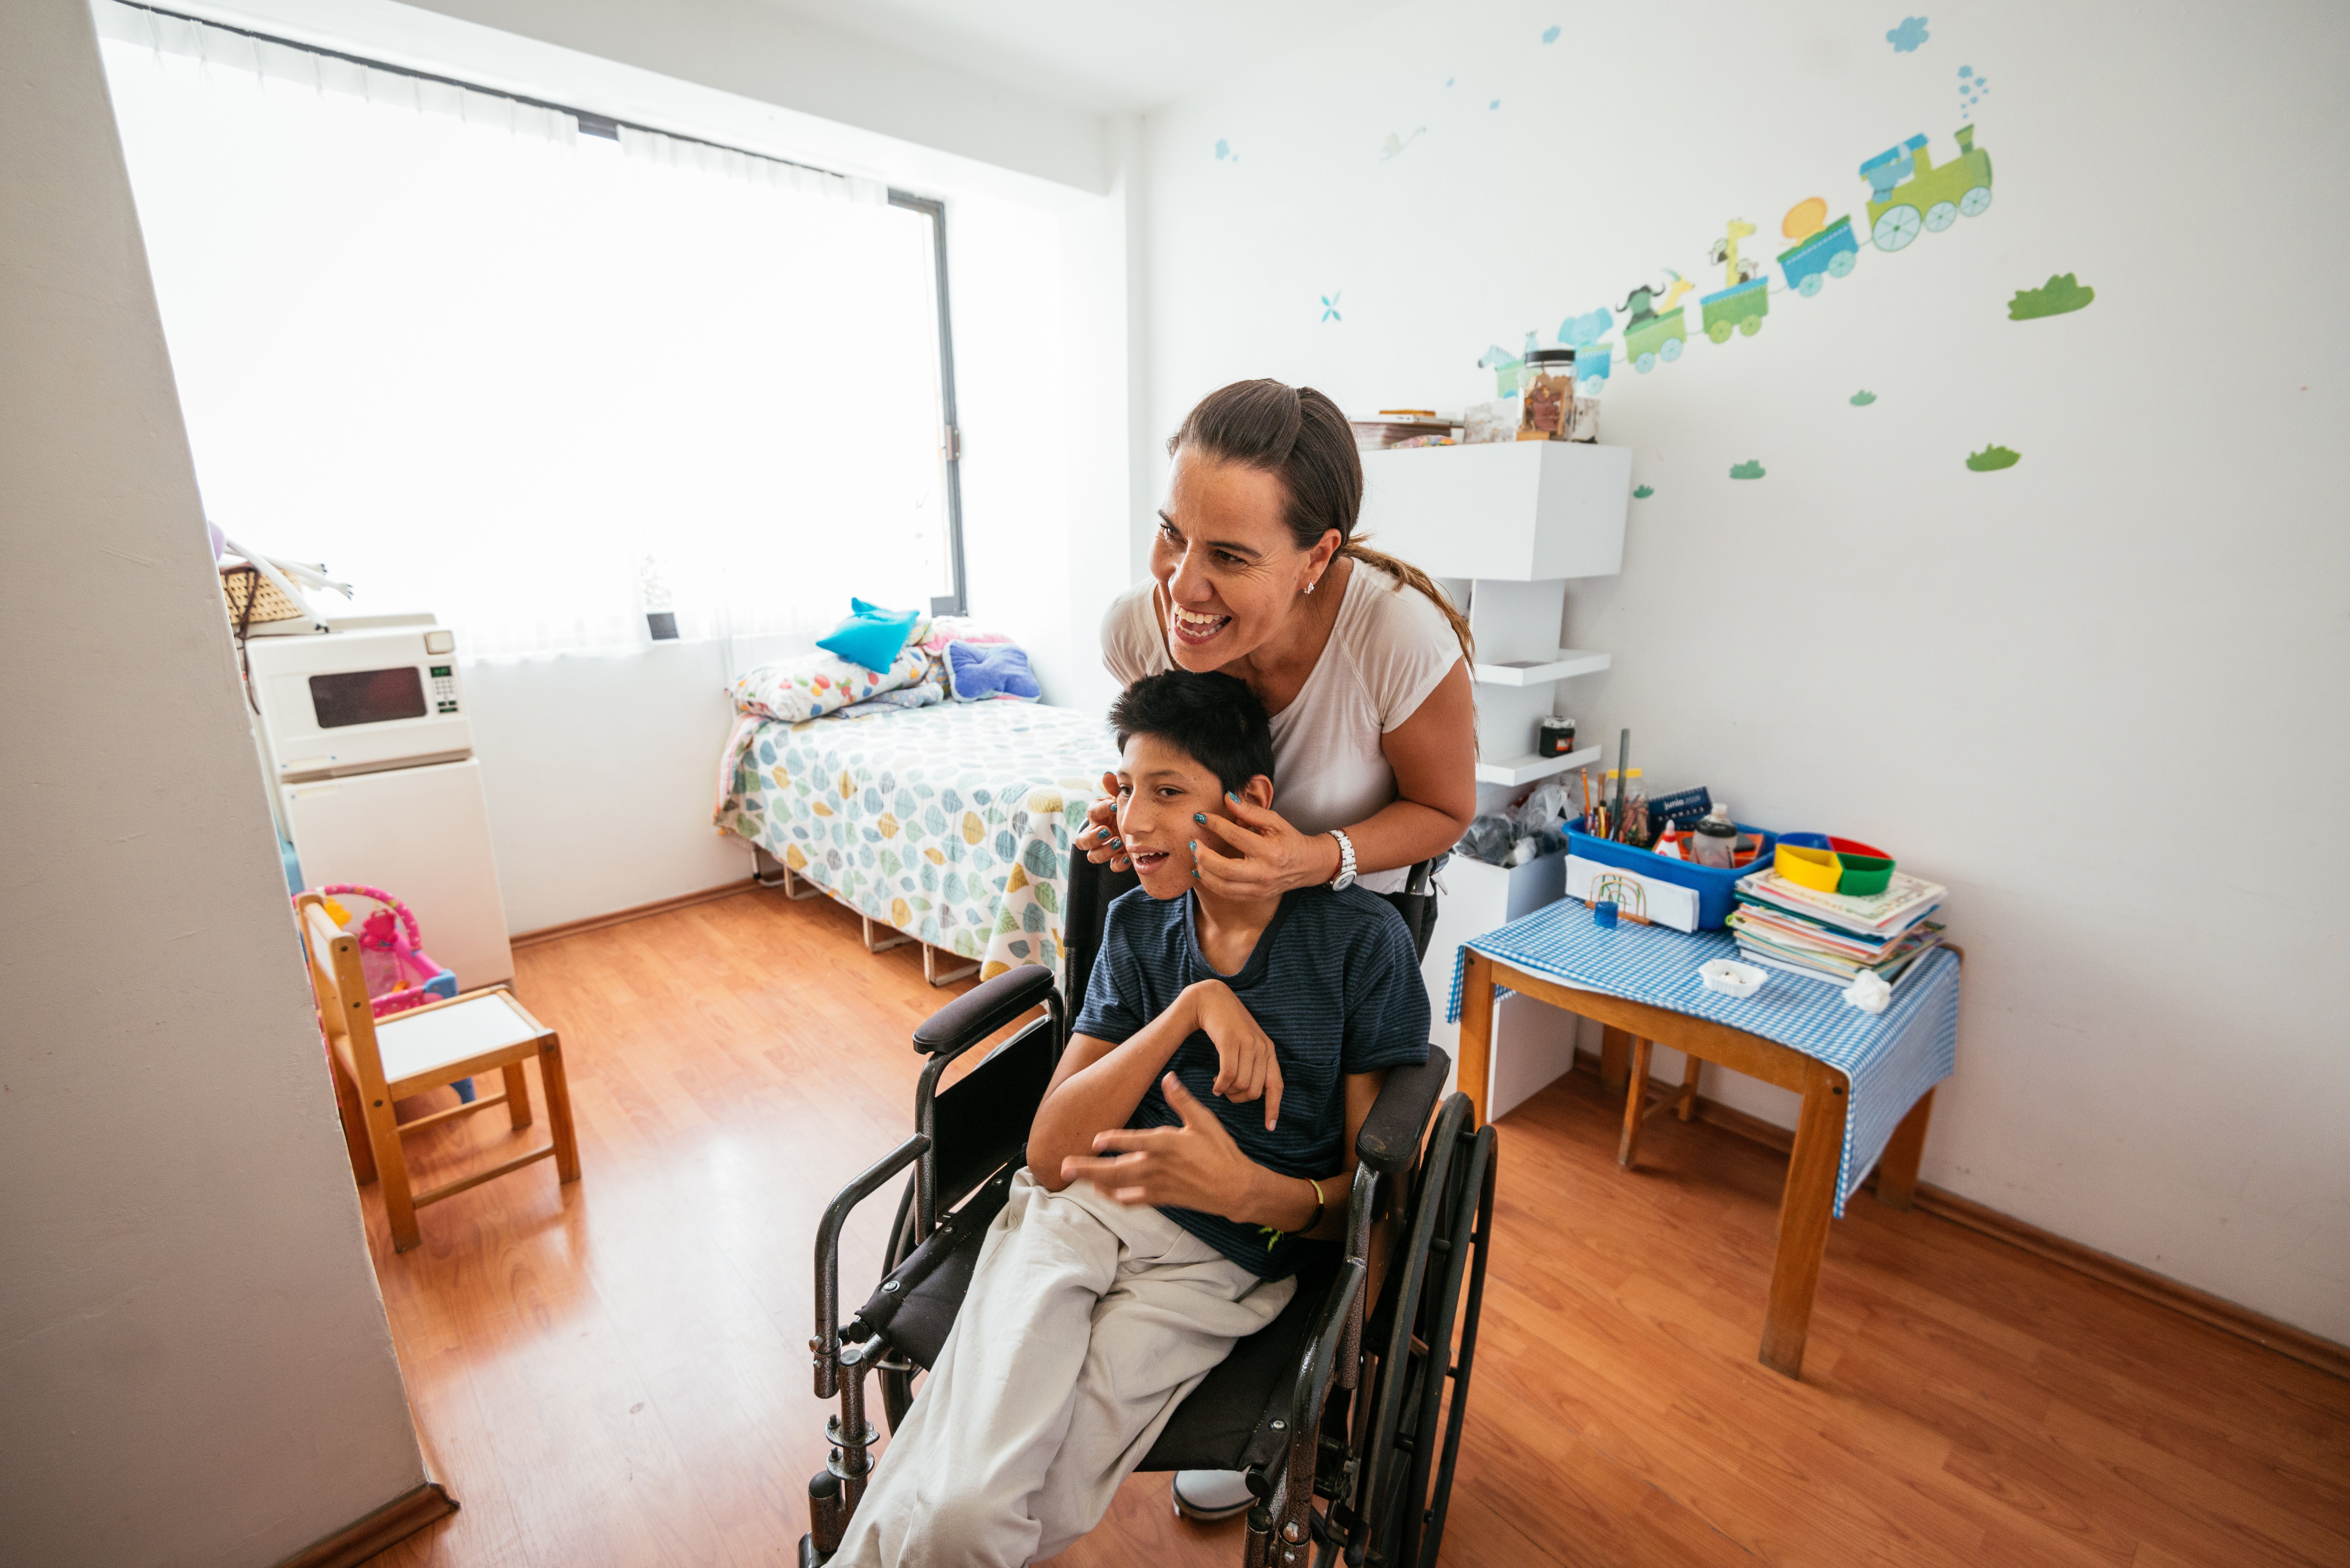 Latina mother massaging her son with Celebral Palsy|Photo: Getty Images